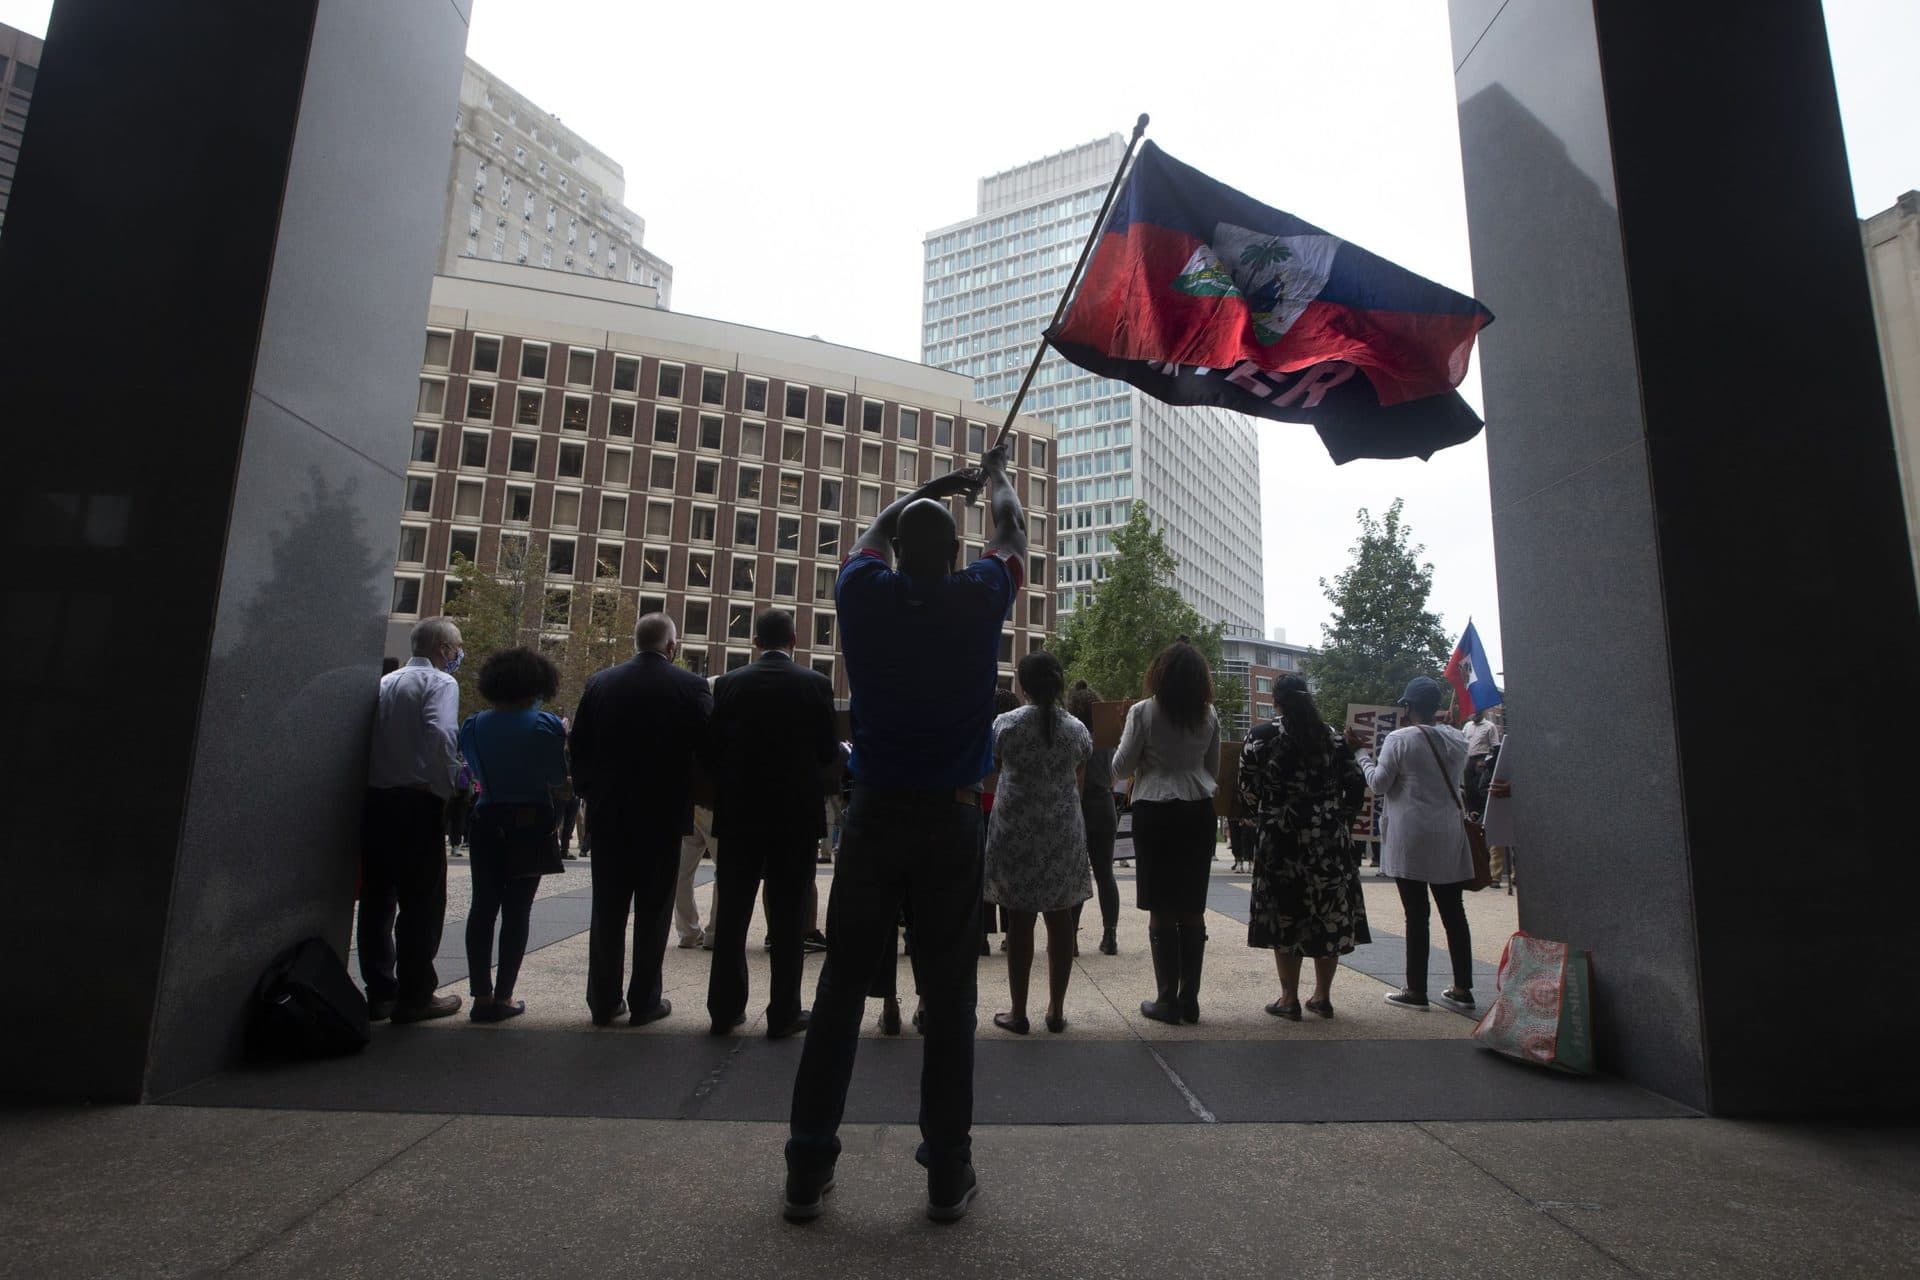 Jean Alfred Sandaire waves a Haitian national flag and a Black Lives Matter flag during the Solidarity with Haiti demonstration at John F. Kennedy Federal Building in Downtown Boston. (Jesse Costa/WBUR)